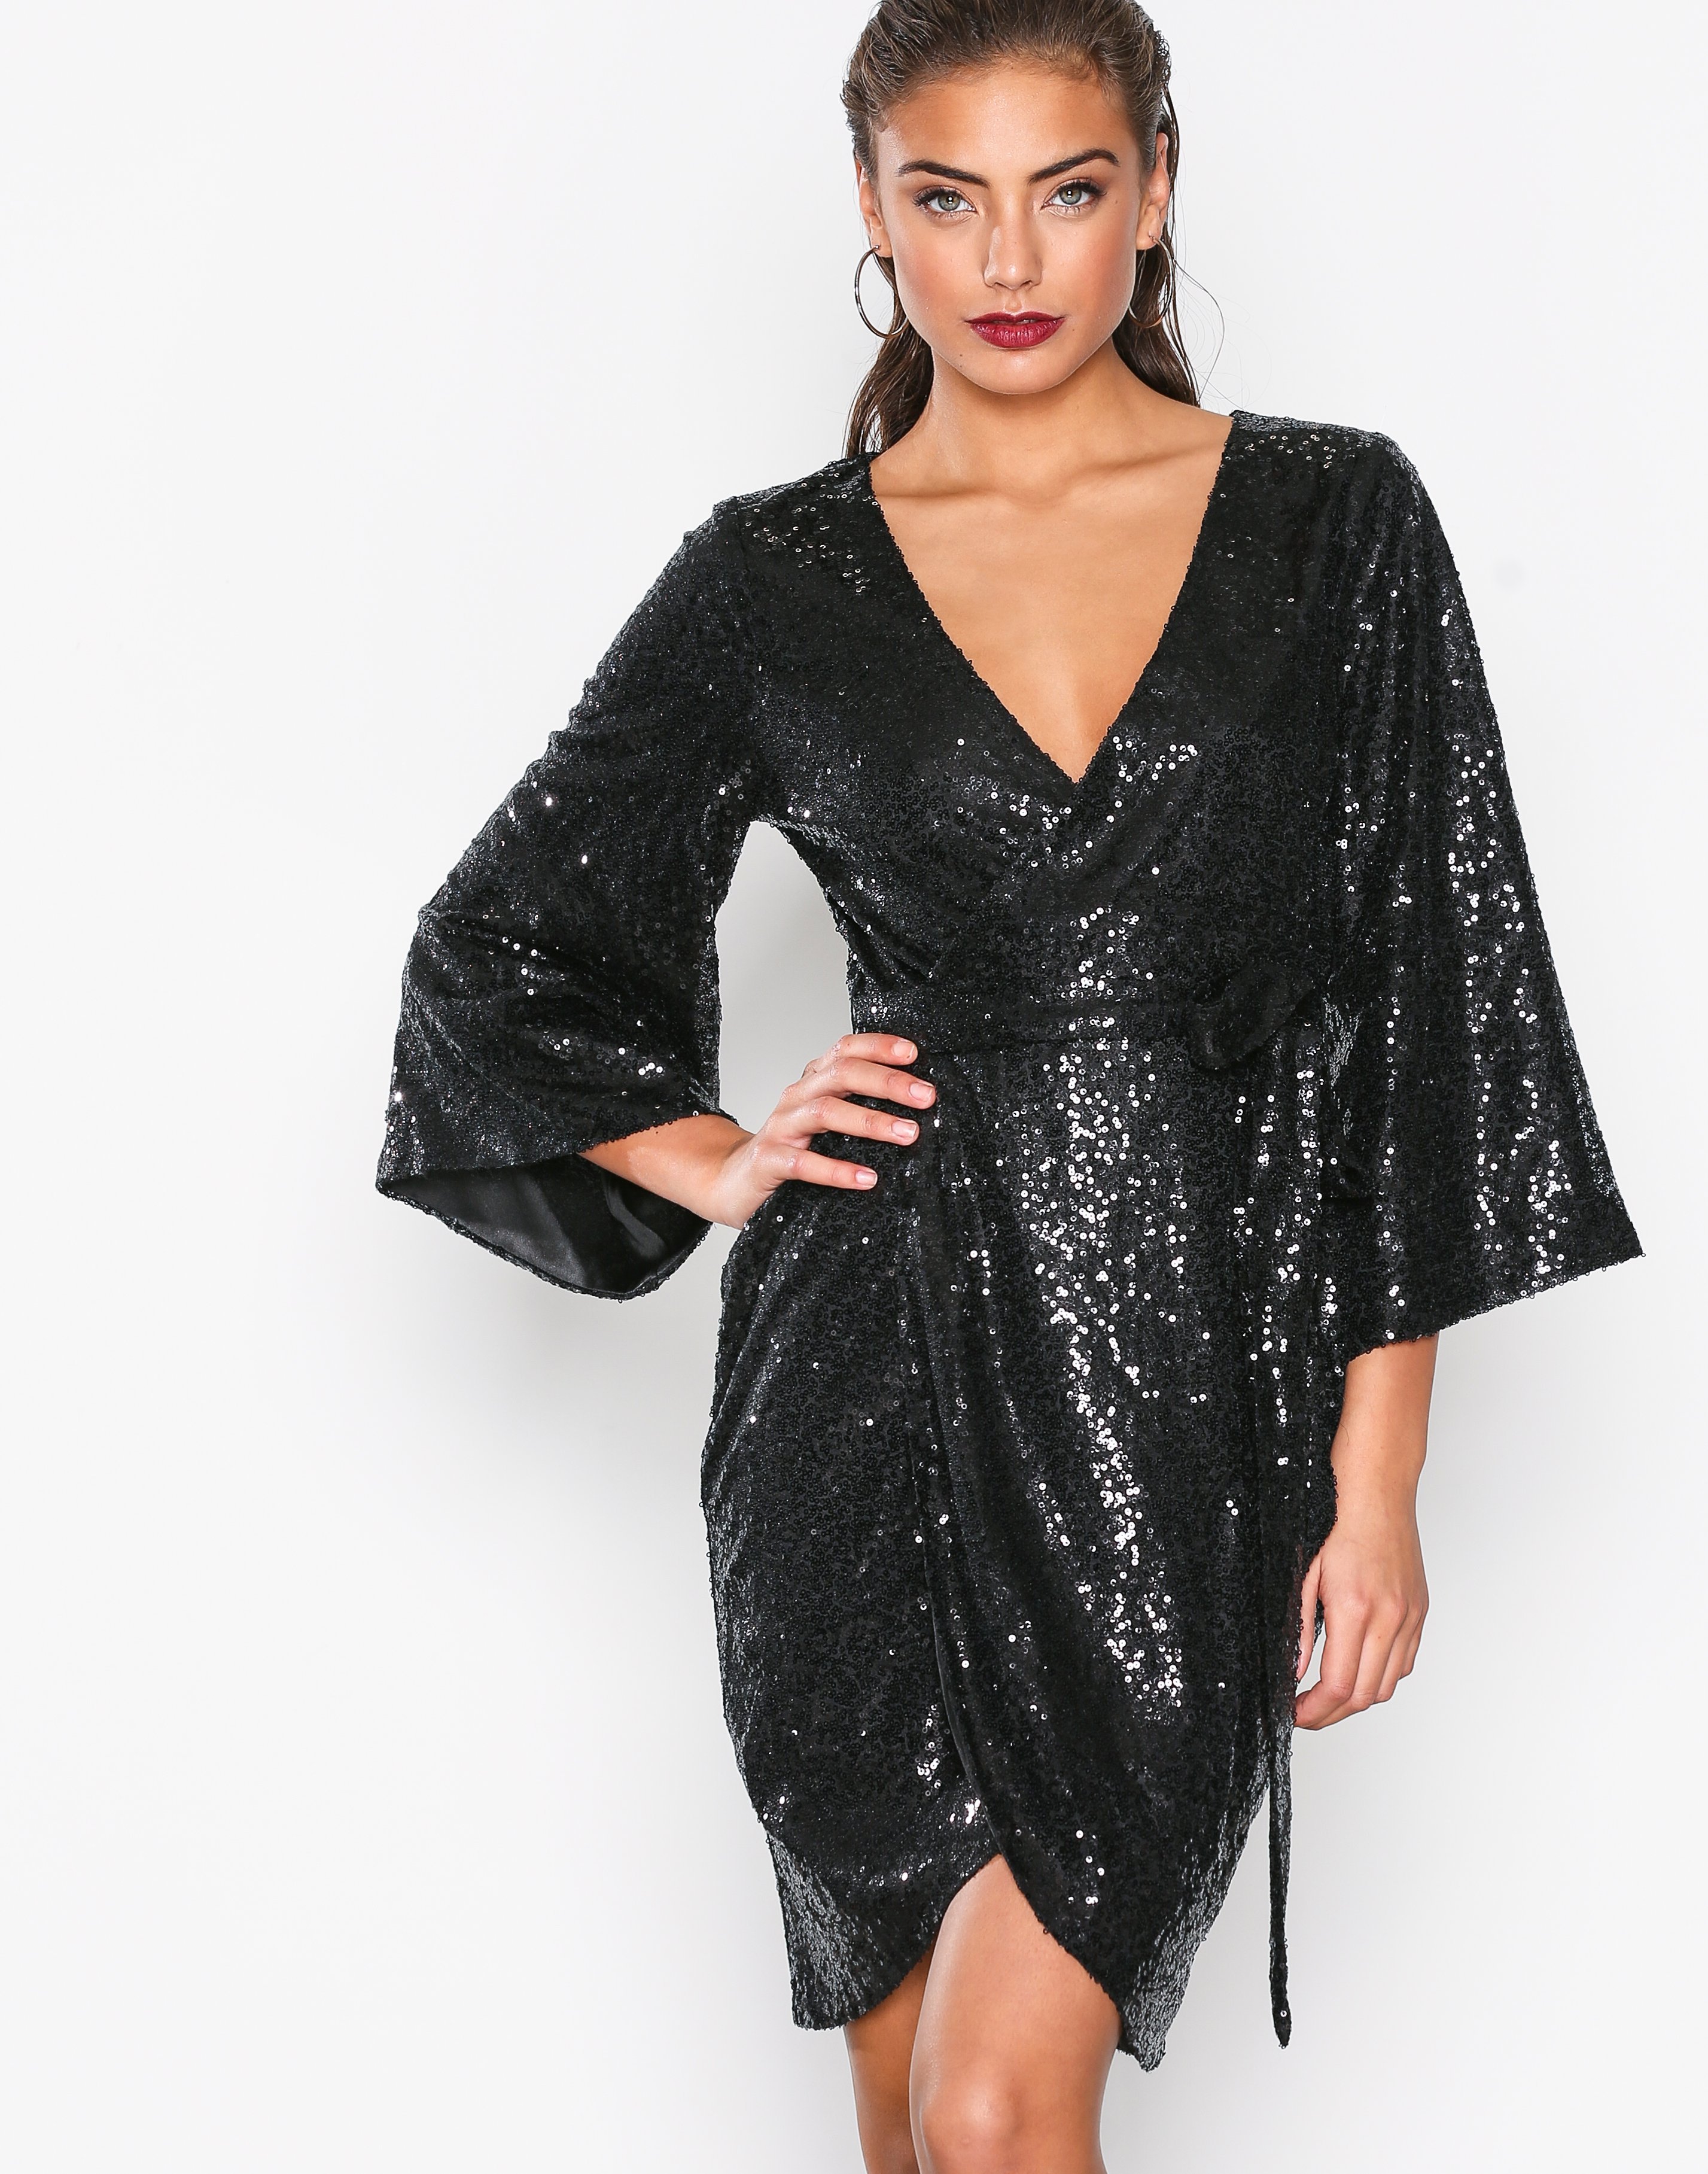 Sequin Wrap Dress - Nly One - Black - Party Dresses - Clothing - Women ...